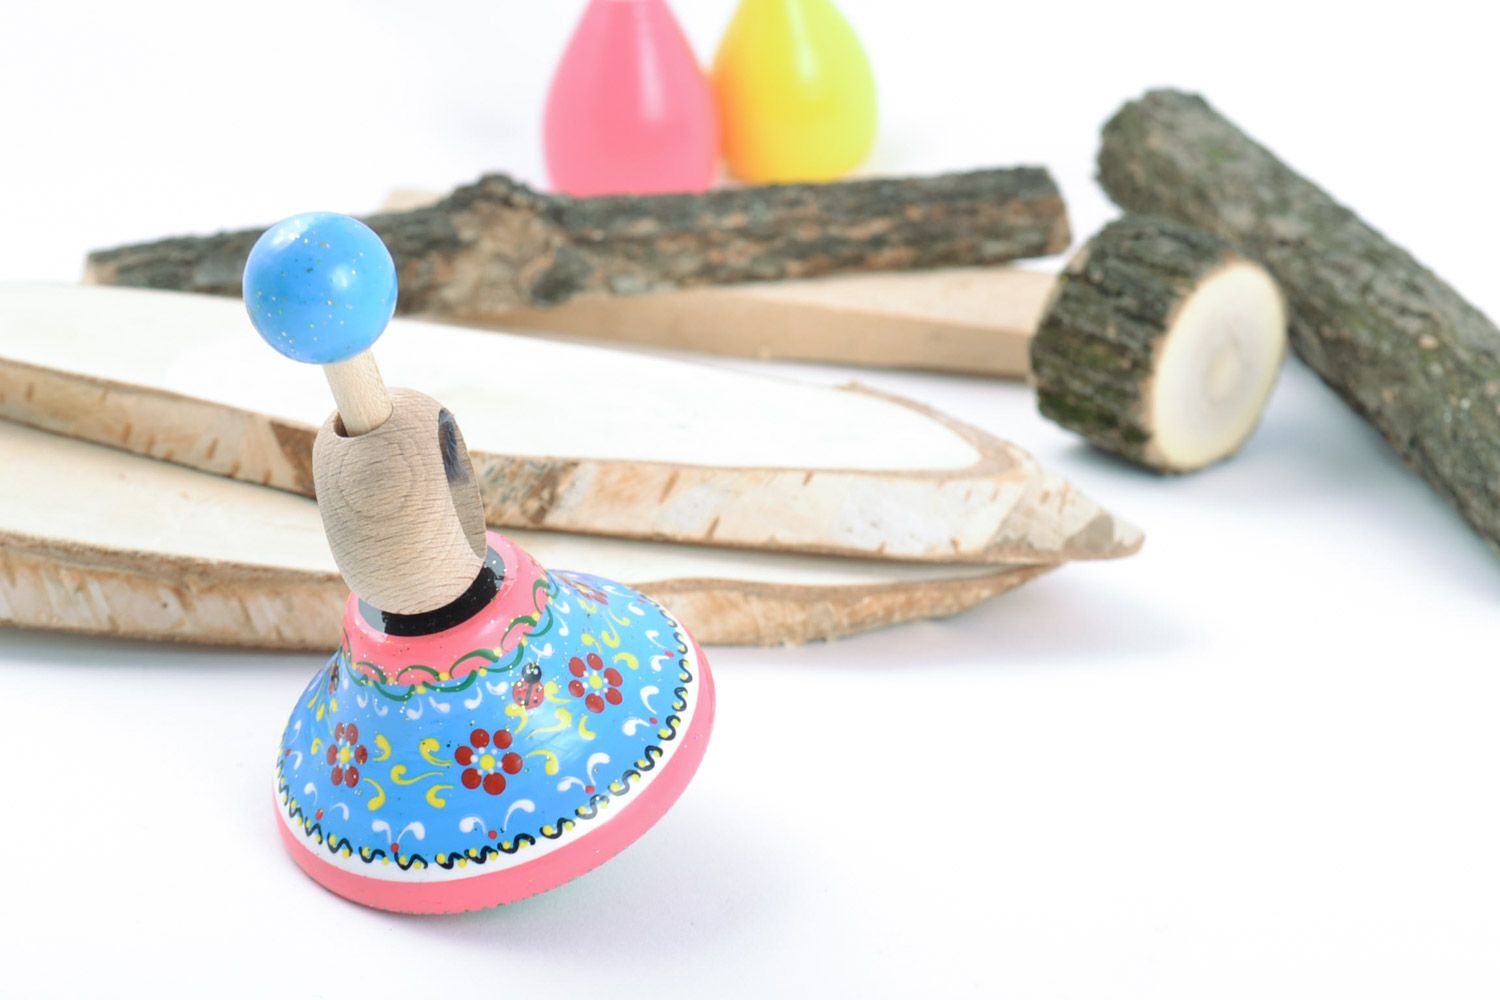 Homemade wooden eco friendly toy spinning top painted in blue and pink colors photo 1